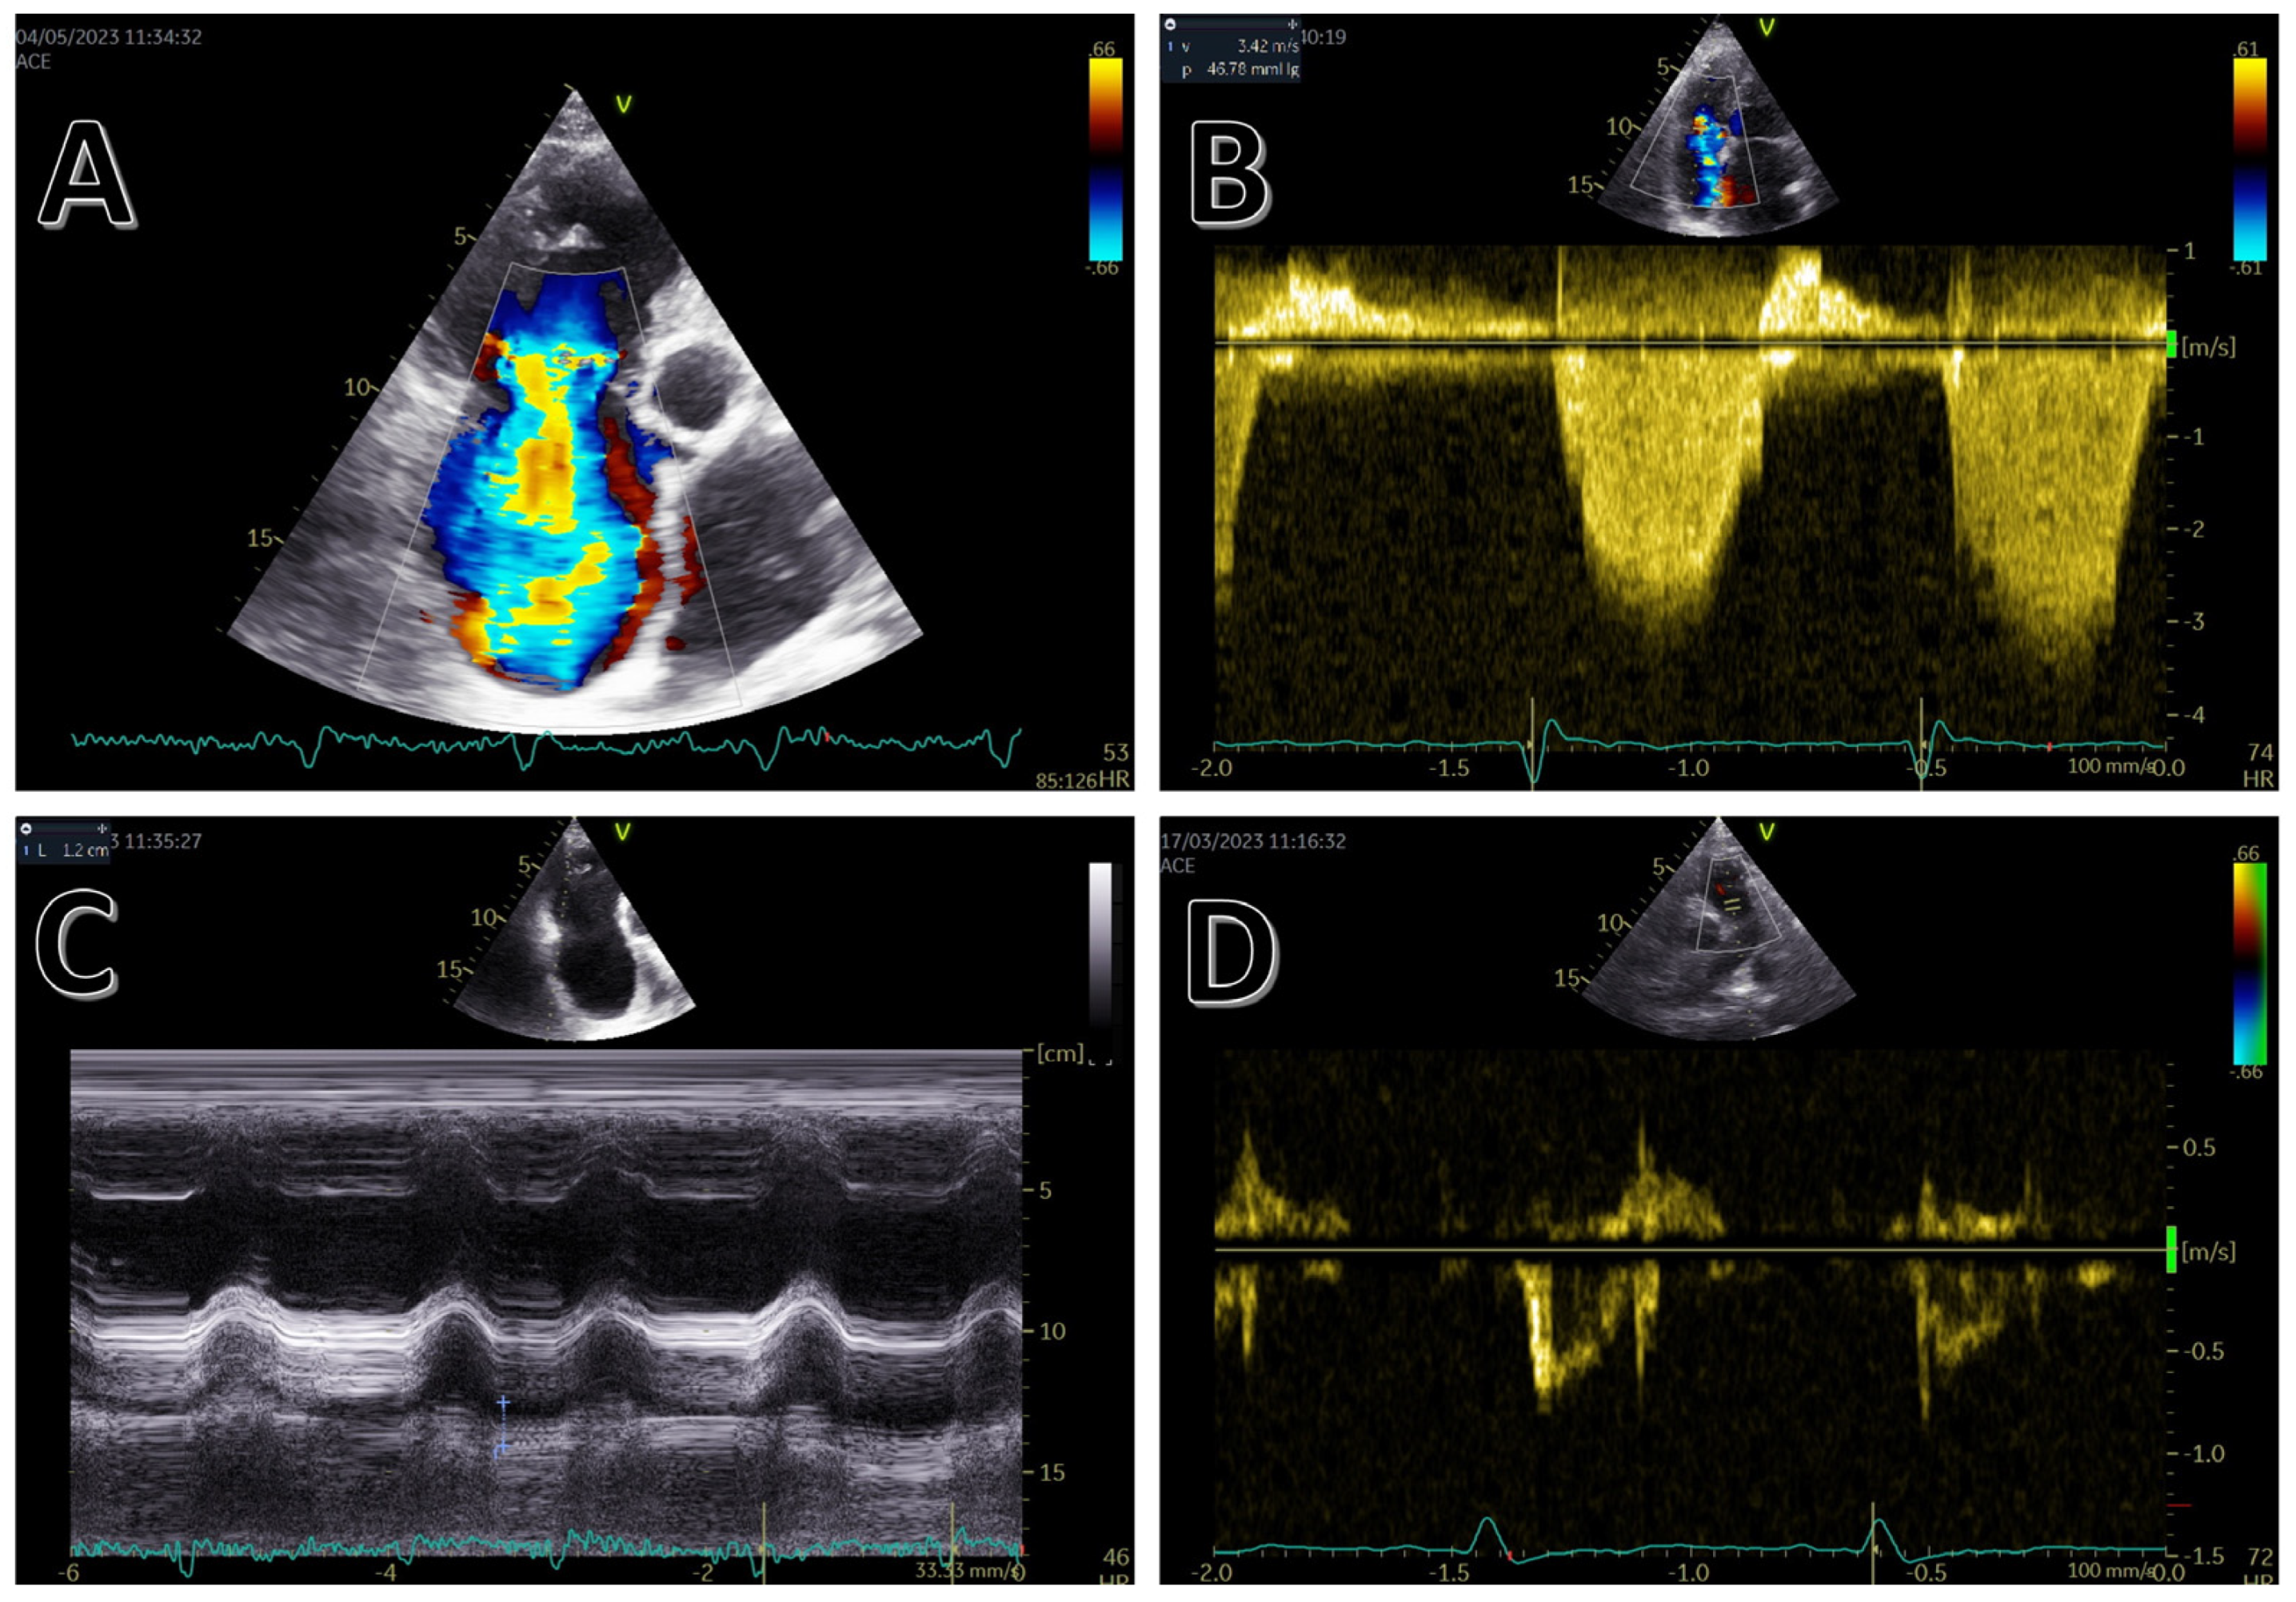 Widespread myocardial dysfunction in COVID-19 patients detected by myocardial  strain imaging using 2-D speckle-tracking echocardiography